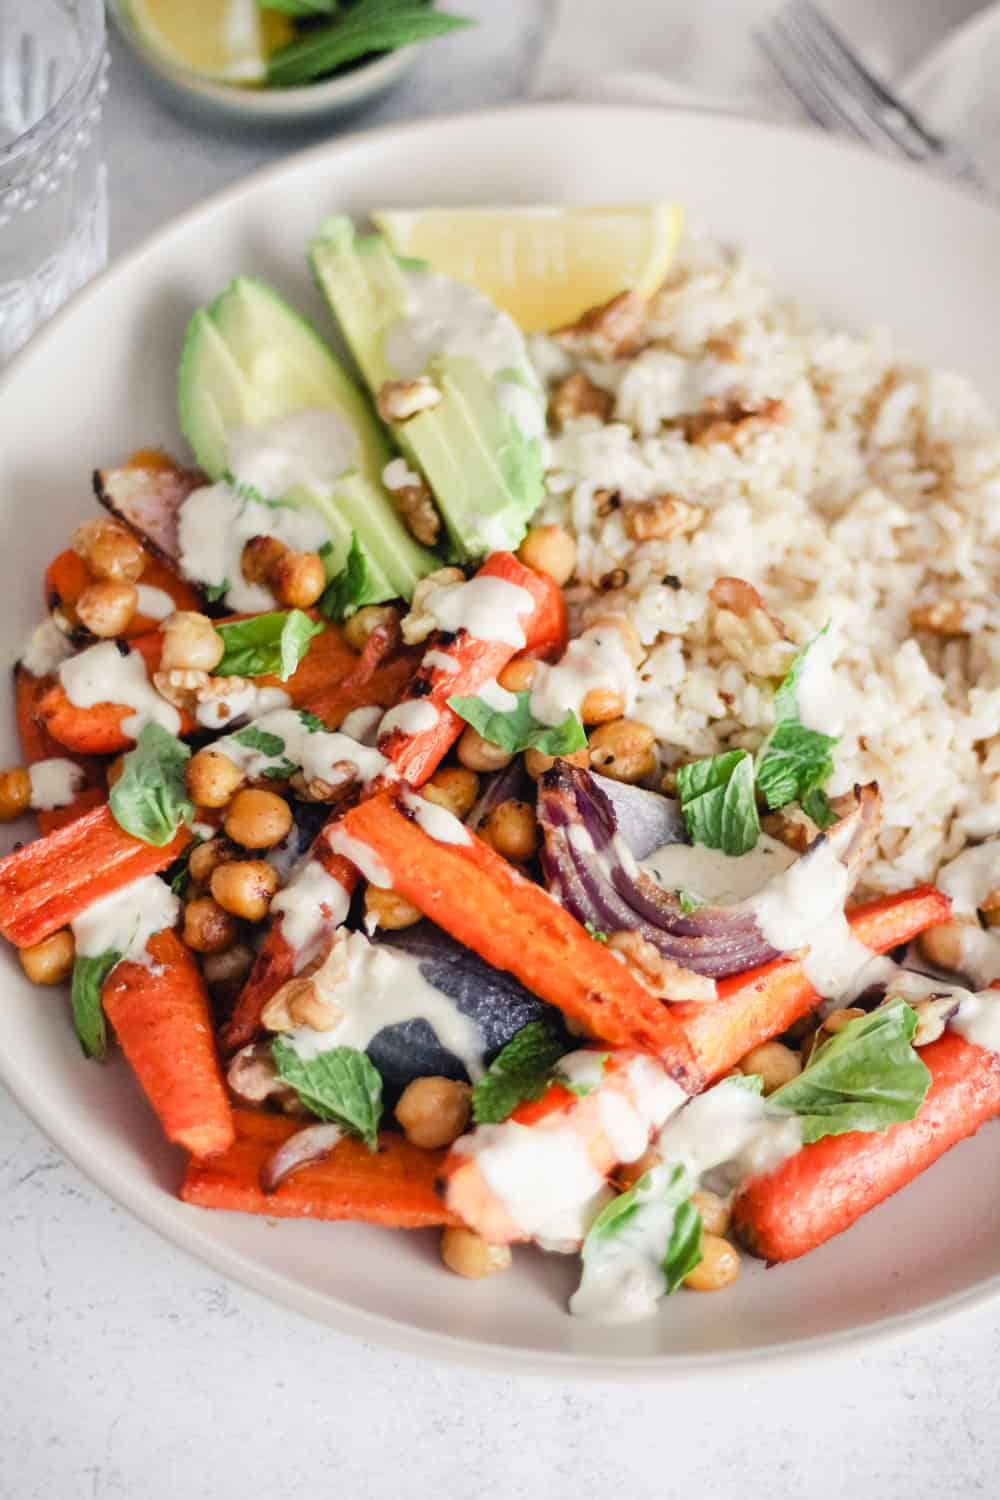 Closeup image of a Vegan Rice Bowl with roasted carrots, onion, chickpeas, and creamy tahini sauce.